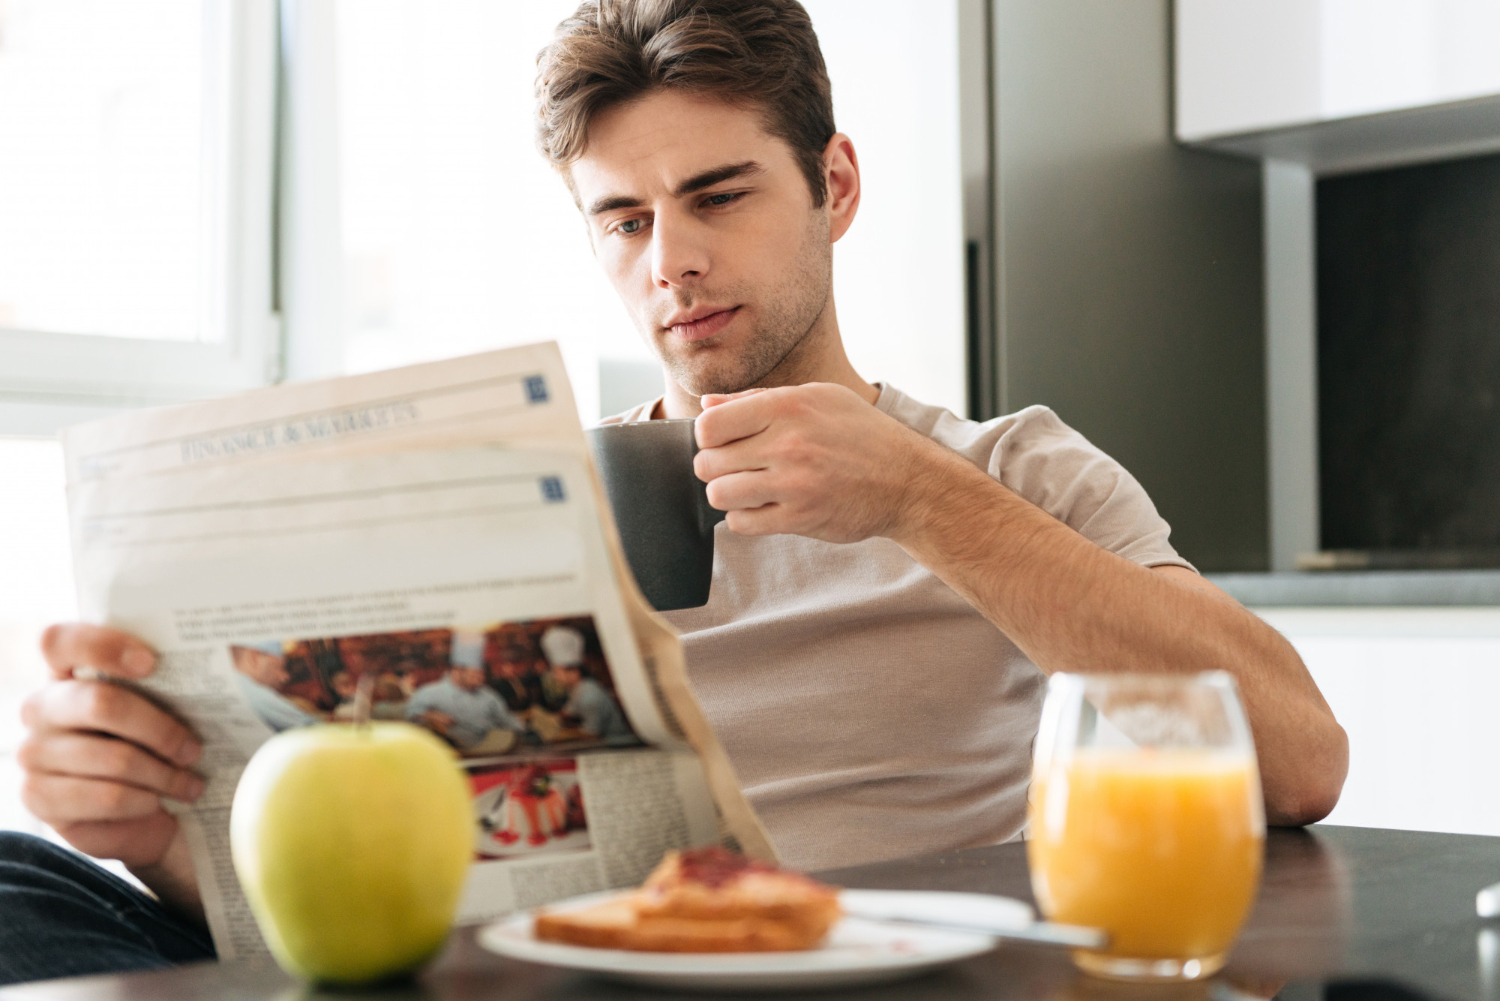 Man in the kitchen with his coffee and newspaper | Source: Freepik